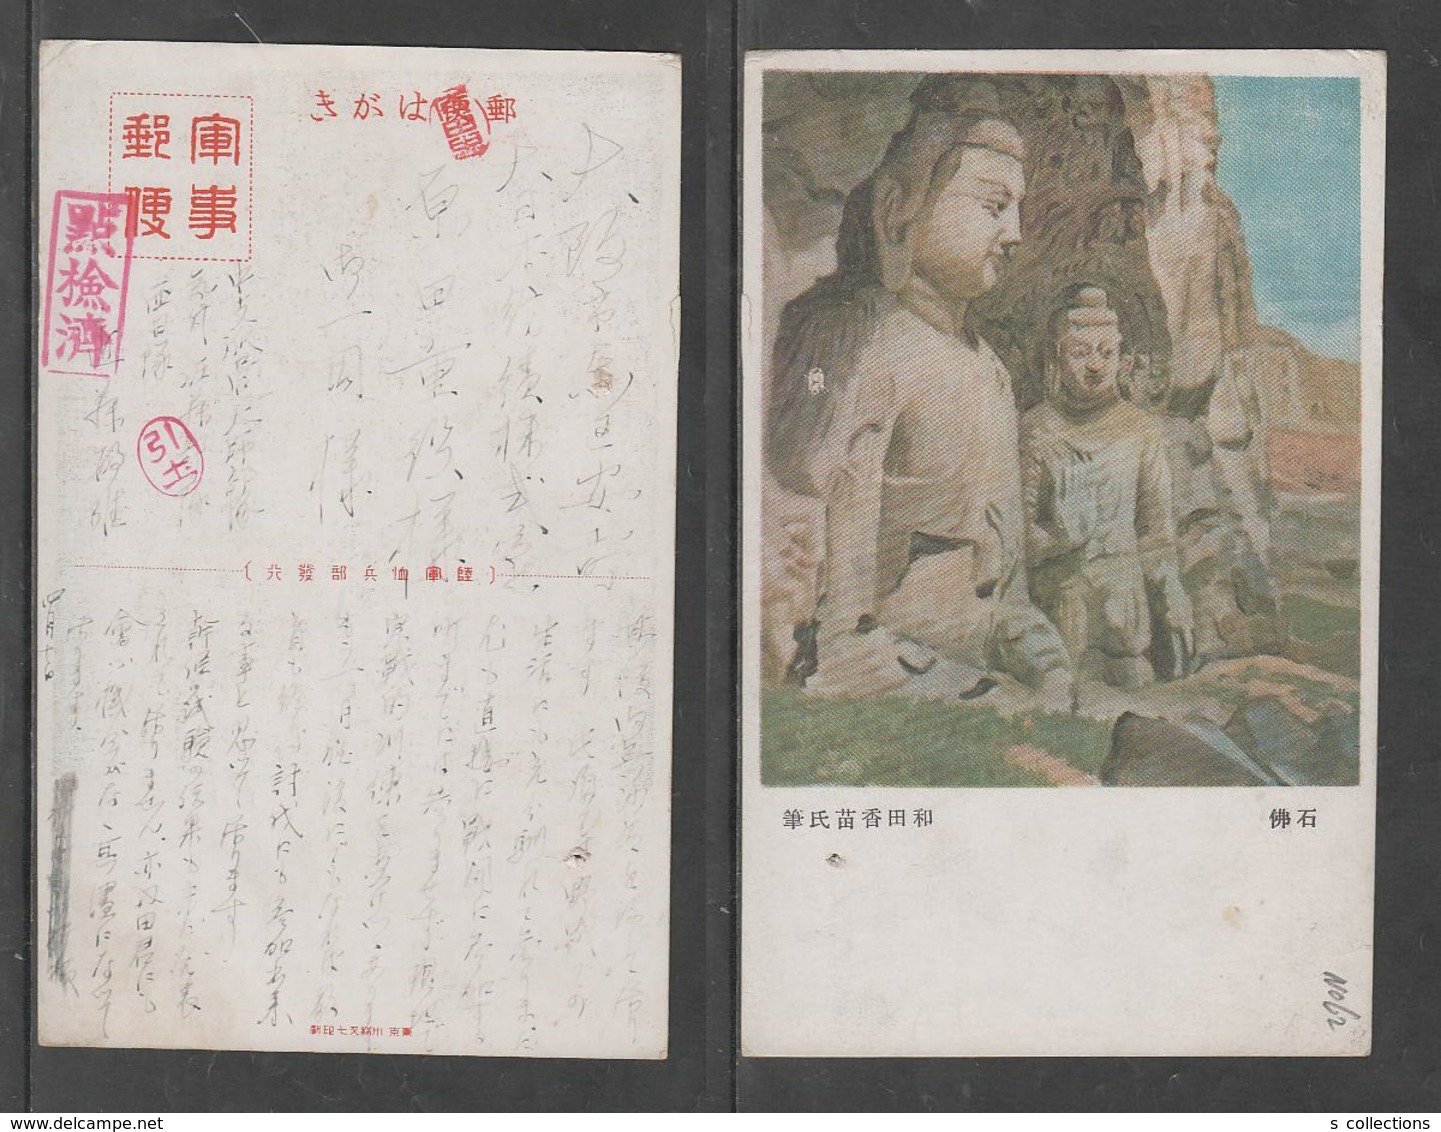 JAPAN WWII Military Stone Buddha Picture Postcard CENTRAL CHINA WW2 MANCHURIA CHINE MANDCHOUKOUO JAPON GIAPPONE - 1941-45 Chine Du Nord